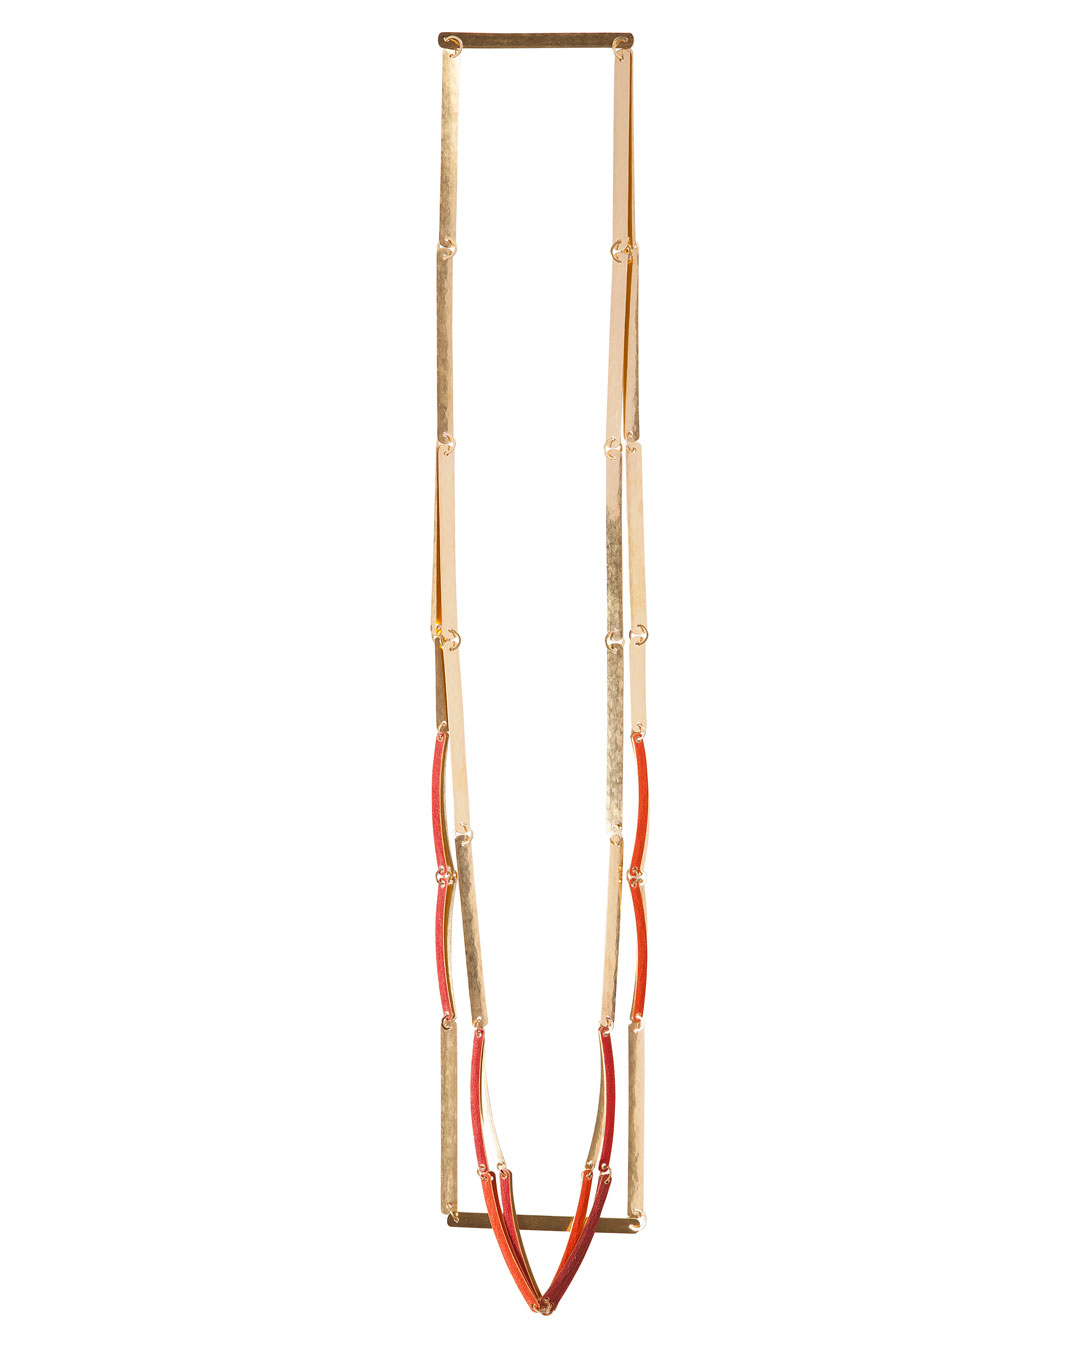 Annelies Planteijdt, Mooie stad - Rode kristallen (Beautiful City - Red Crystals), 2015 (1/5), necklace; gold, pigments, 630 x 120 x 6 mm, price on request (image 2/2)